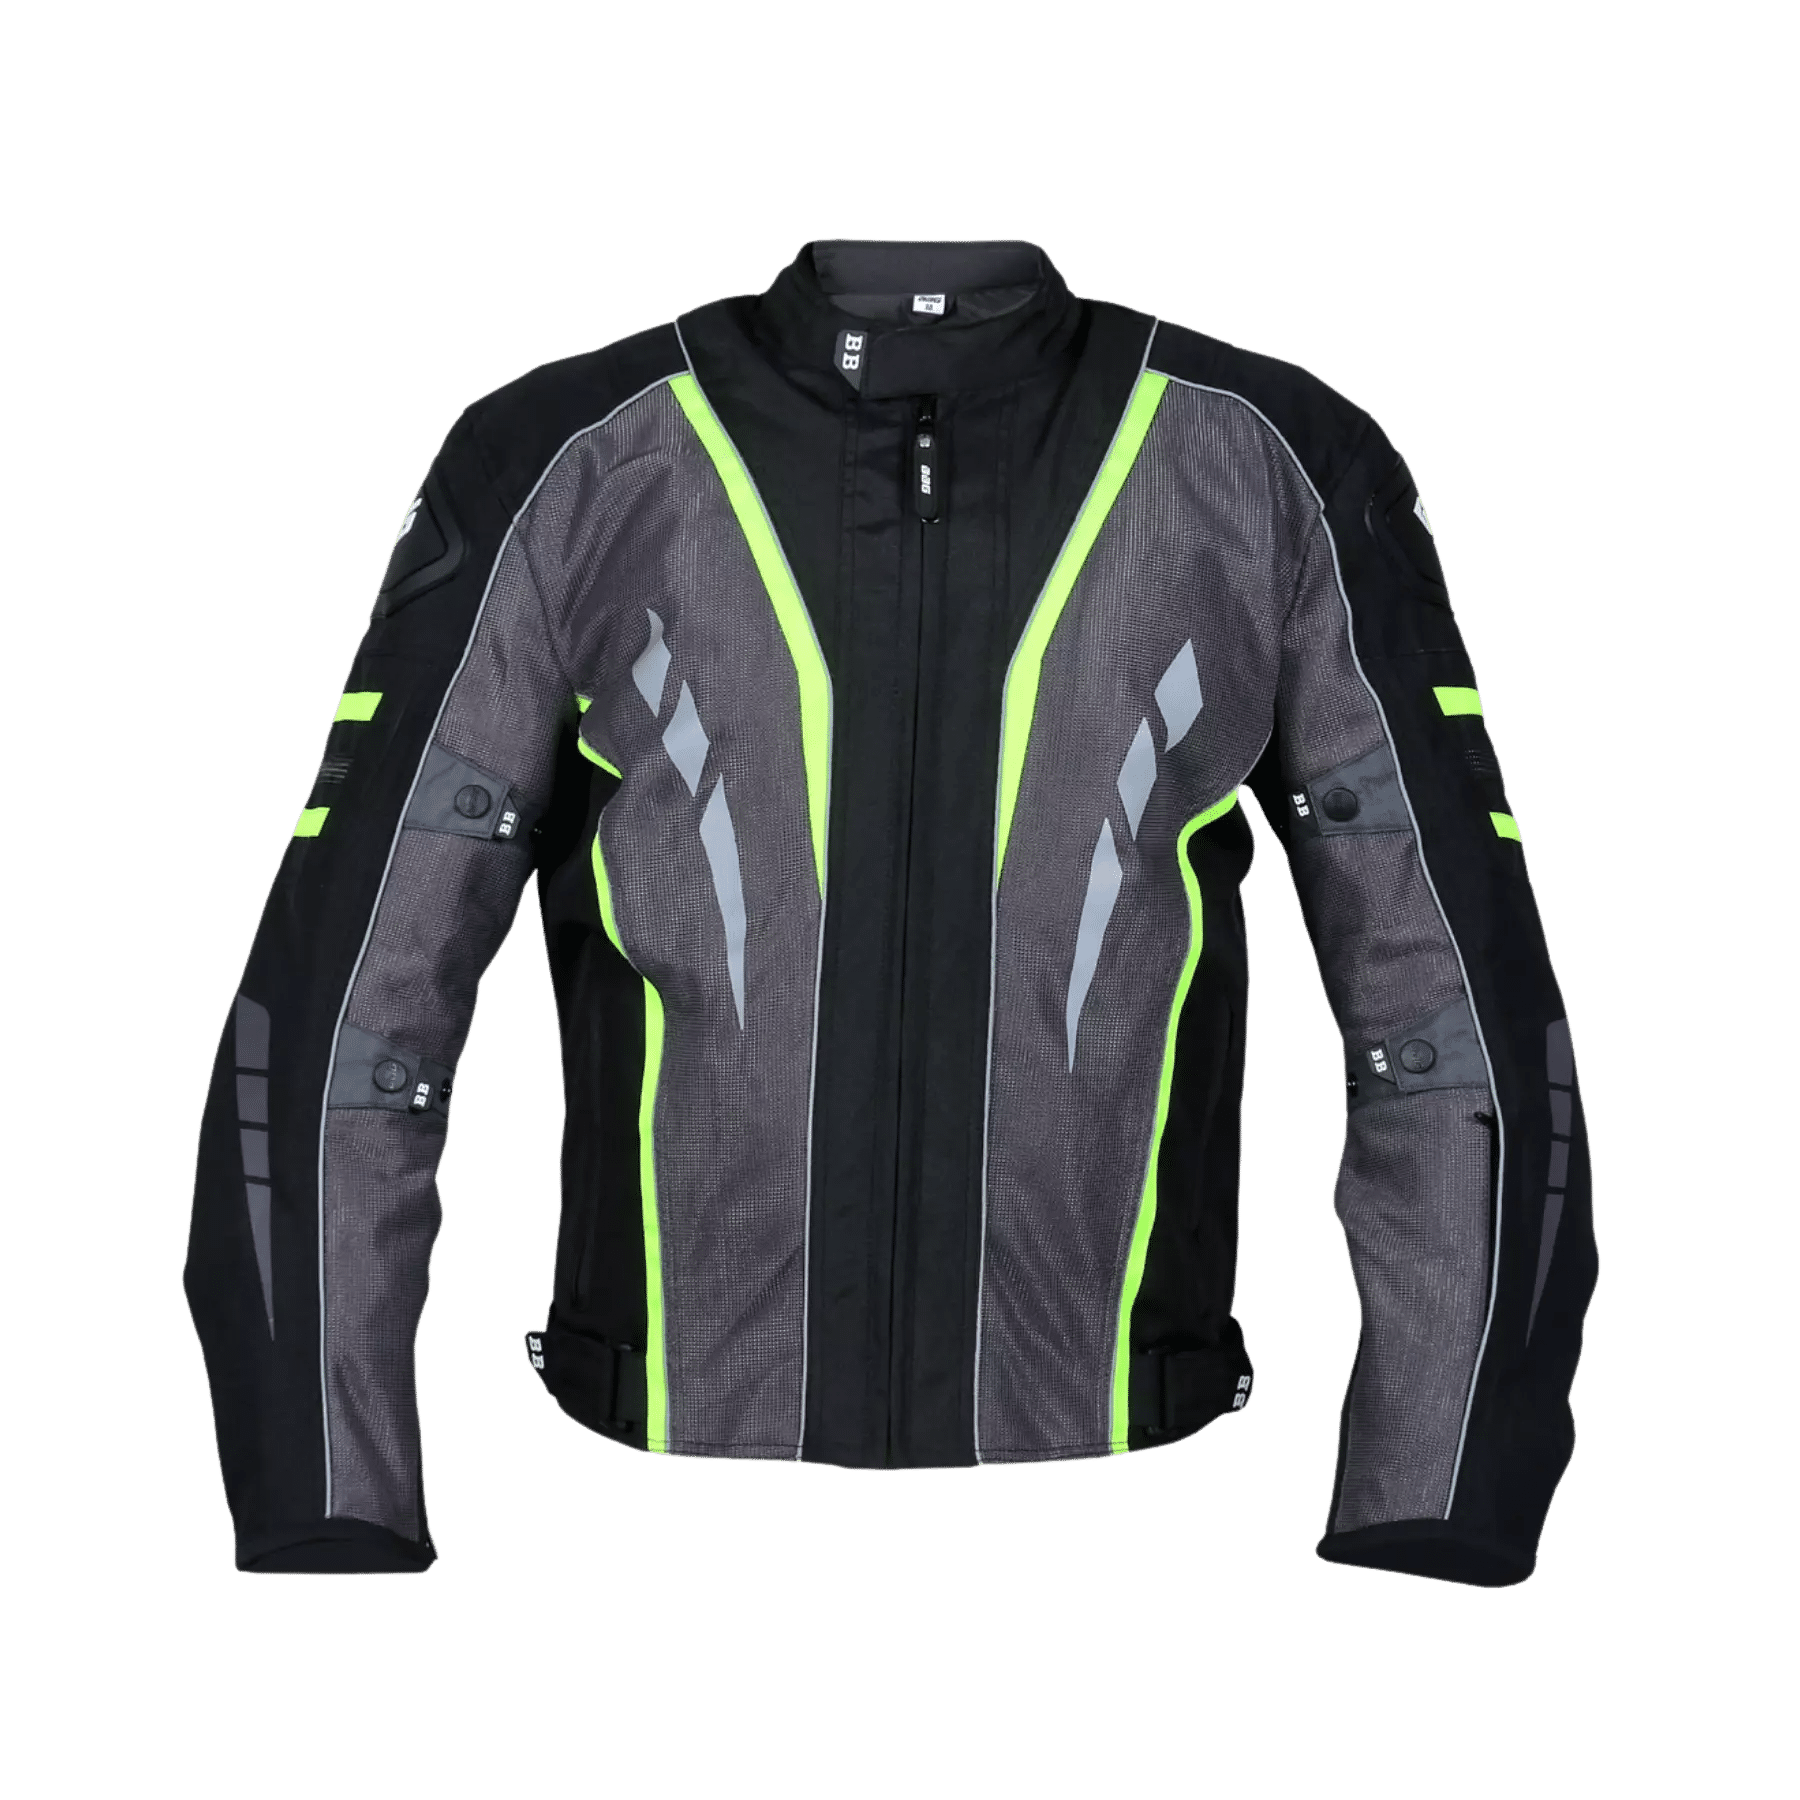 These are product images of Women Riding Jacket on rent by SharePal in Bangalore.